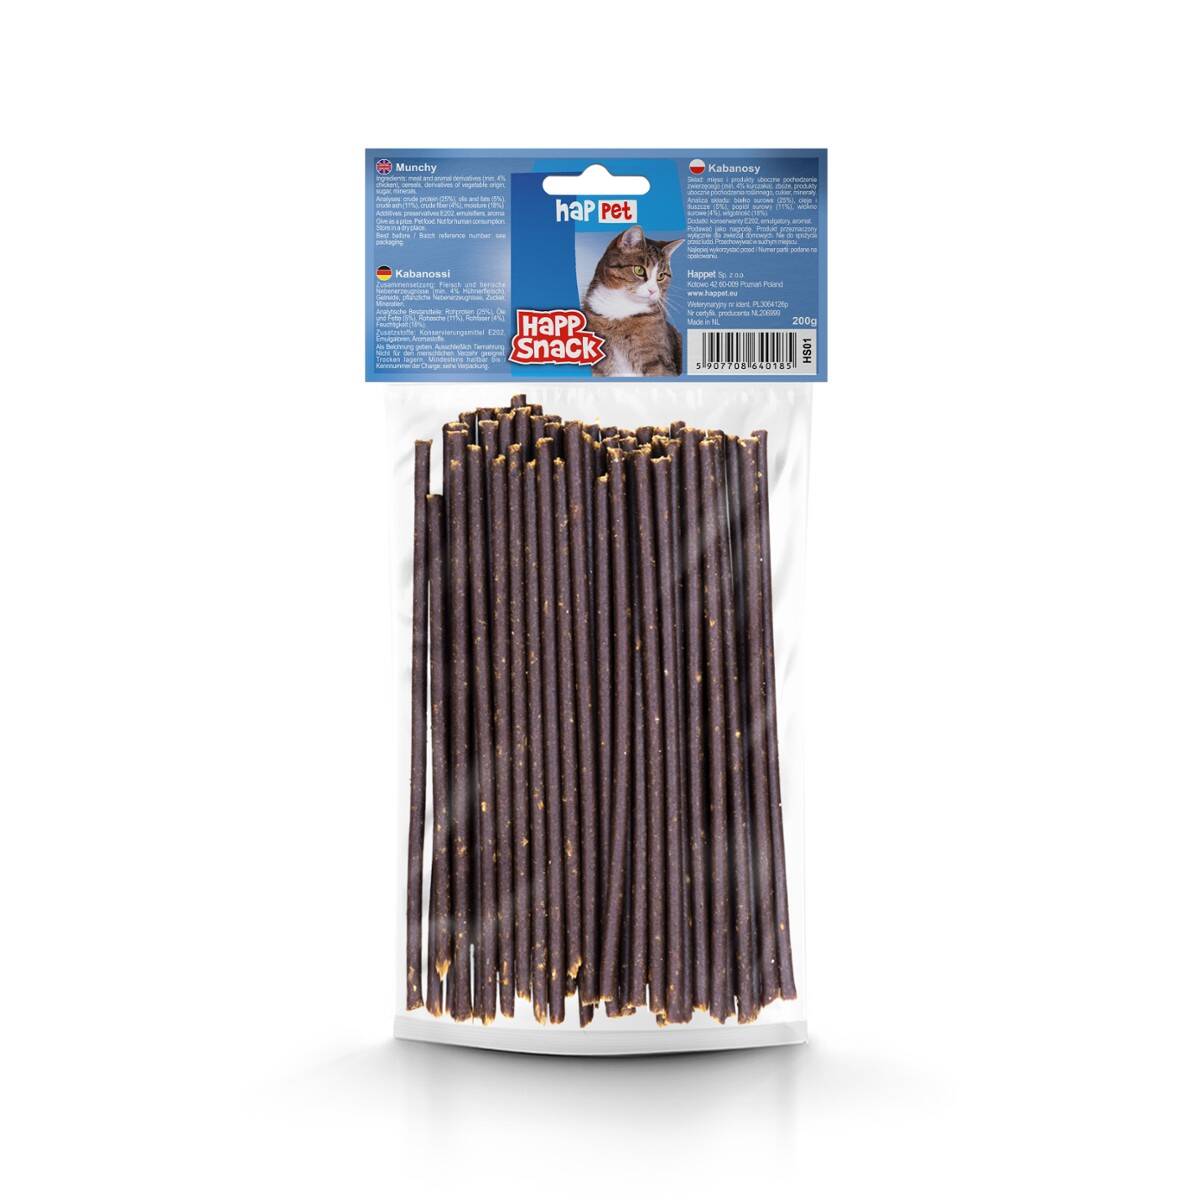 Thin smoked pork sausage for cats 200g Happet (Z-HS01CM)